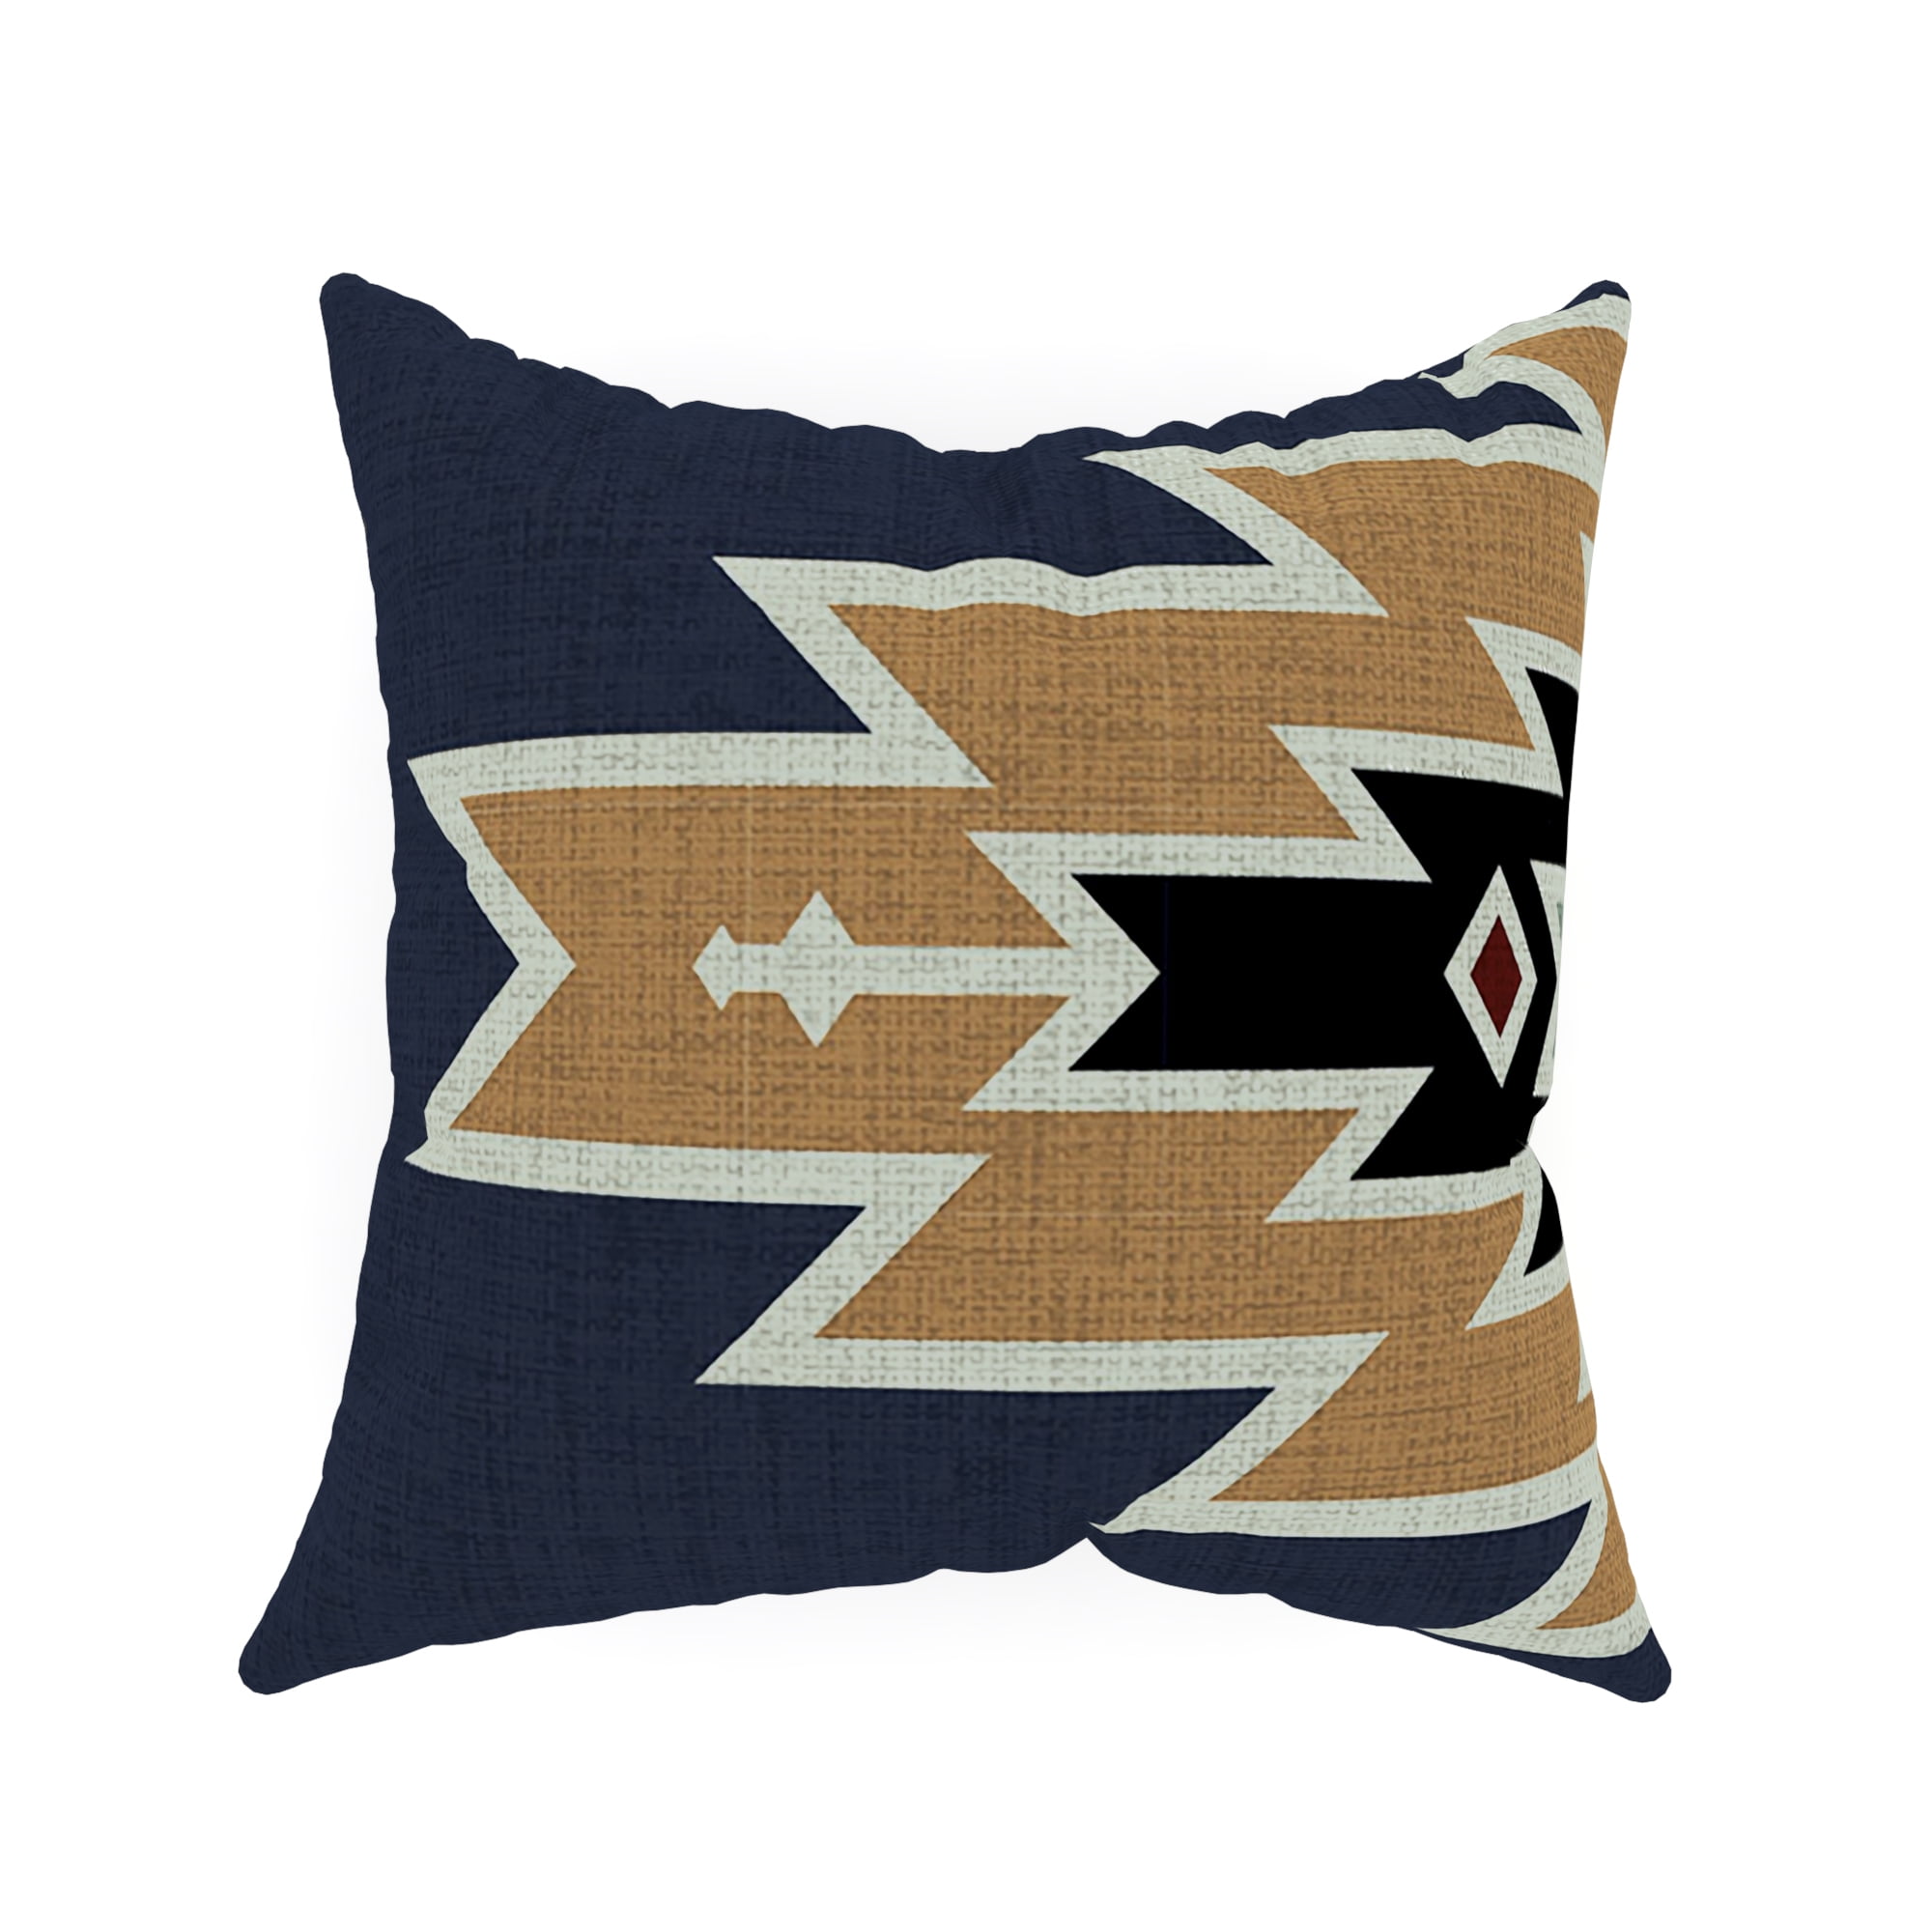 Multicolor Simply Home Texas State Flag Tapestry Throw Pillow